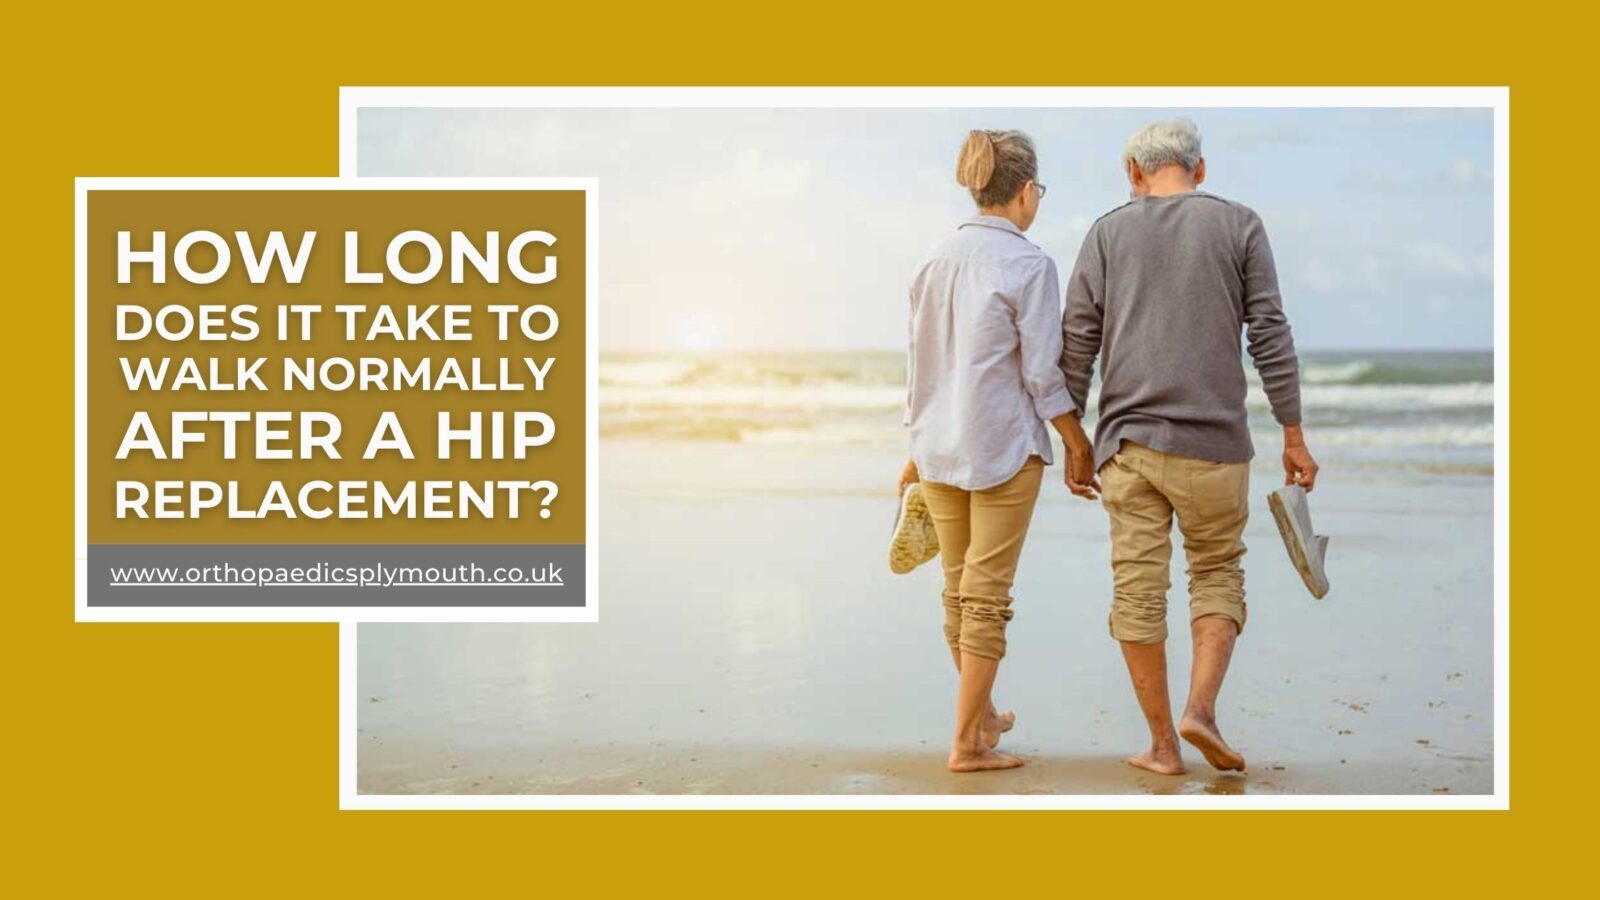 How long does it take to walk normally after a hip replacement?